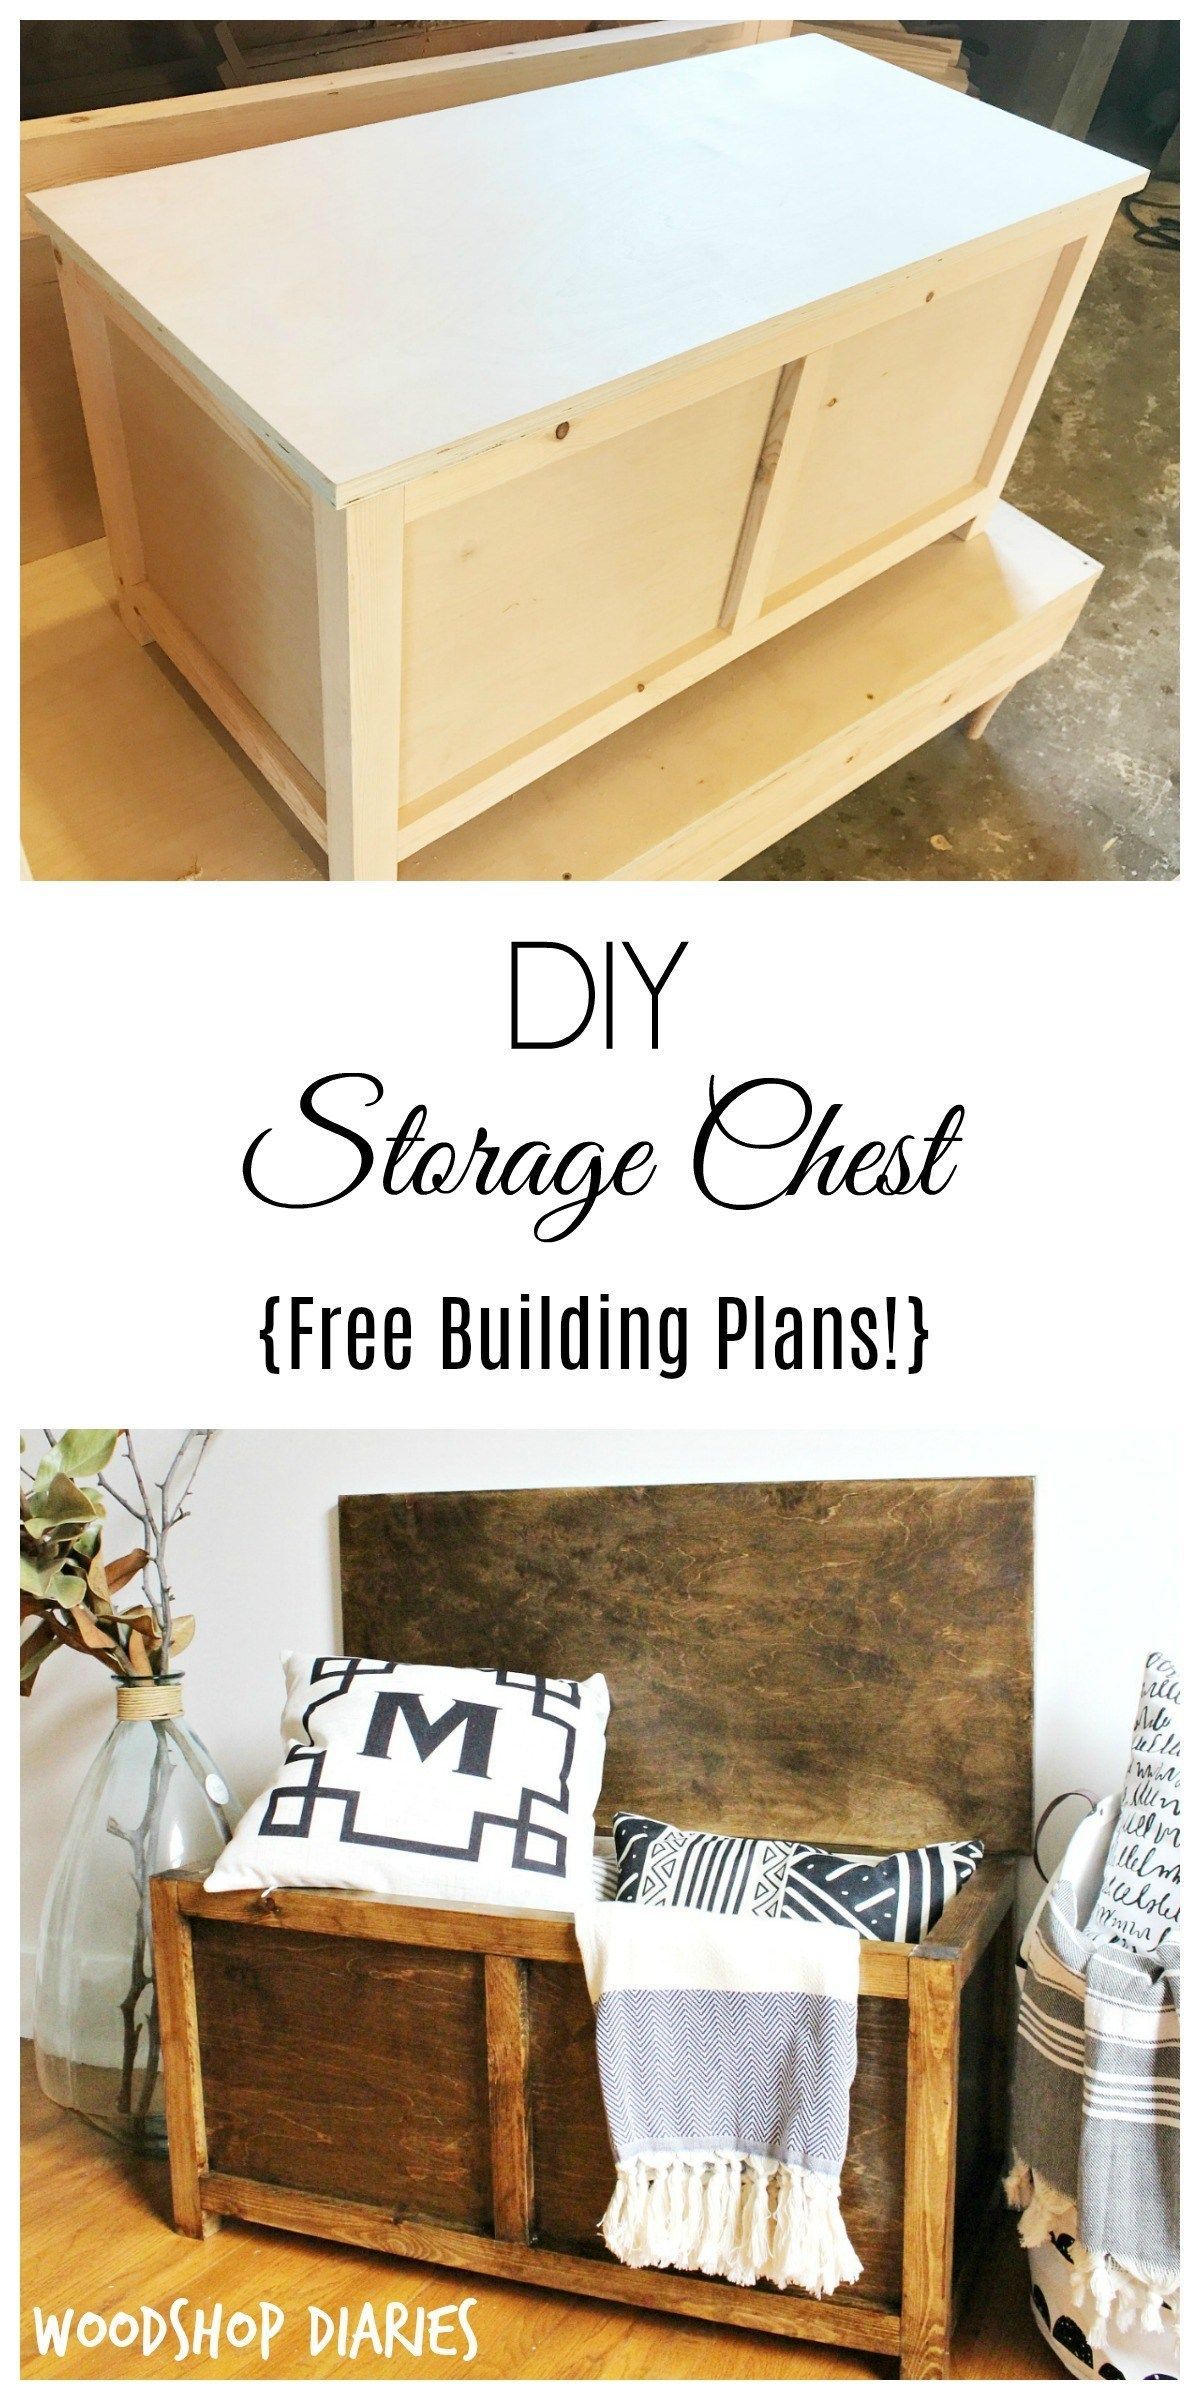 How to Build a Simple DIY Storage Chest - How to Build a Simple DIY Storage Chest -   19 diy Storage bench ideas